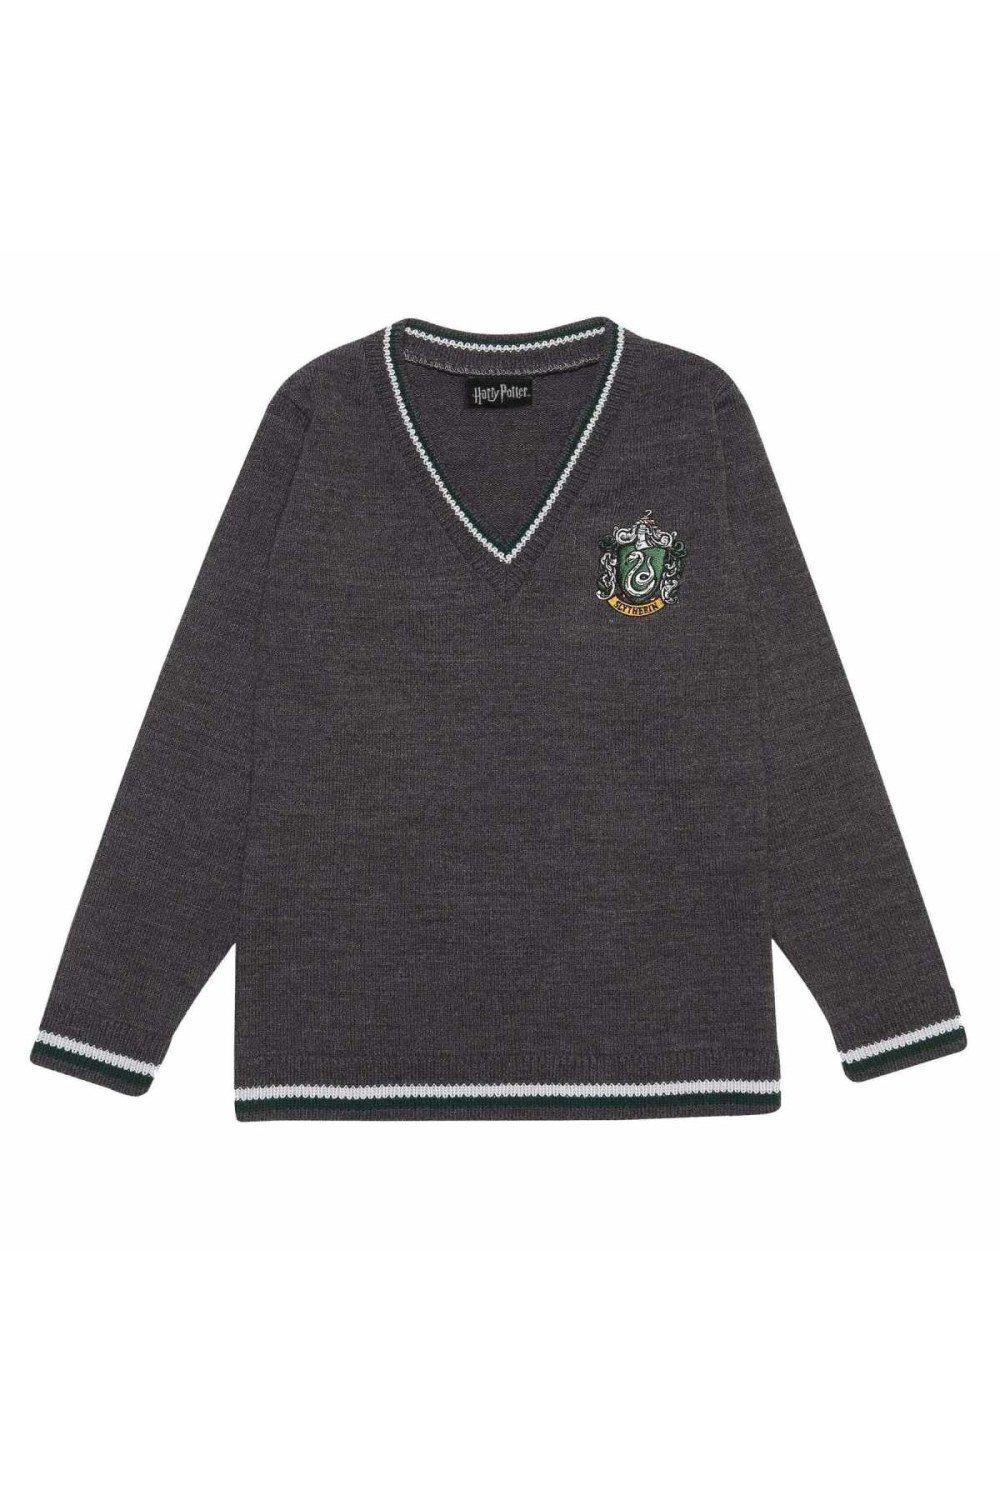 Slytherin Knitted Jumper